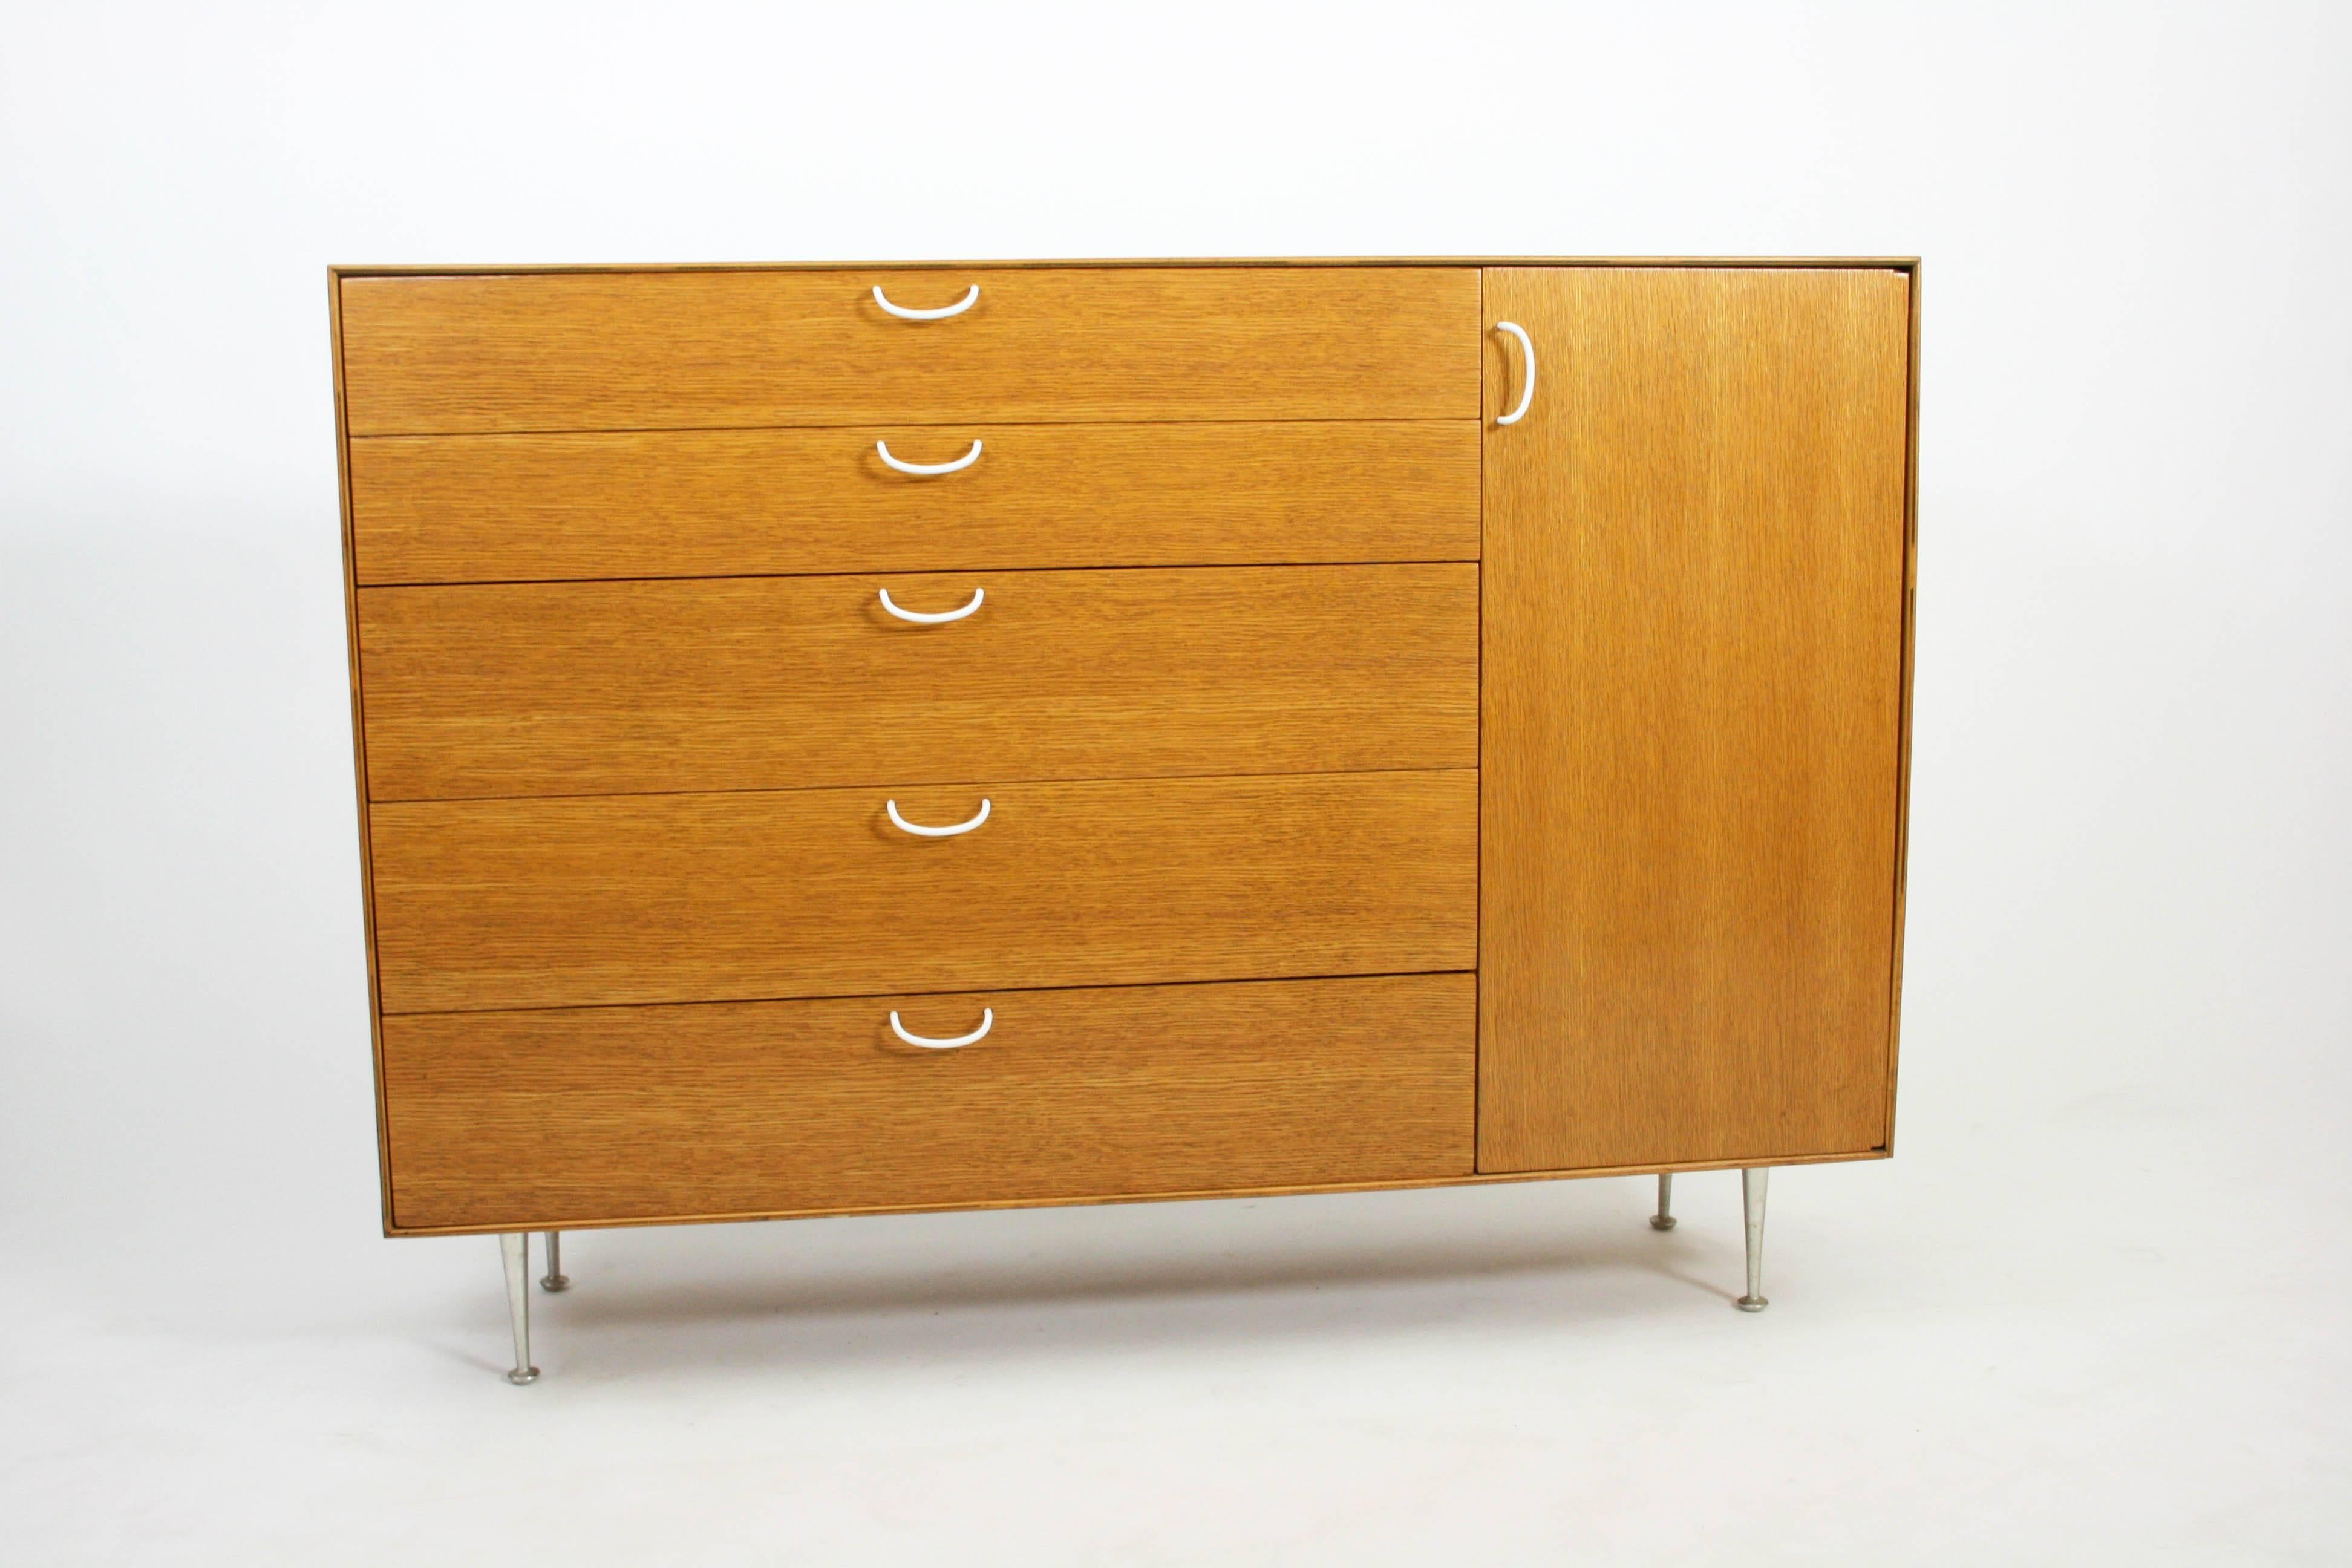 Rare 1952 Combed Oak Thin Edge George Nelson Cabinet for Herman Miller 2